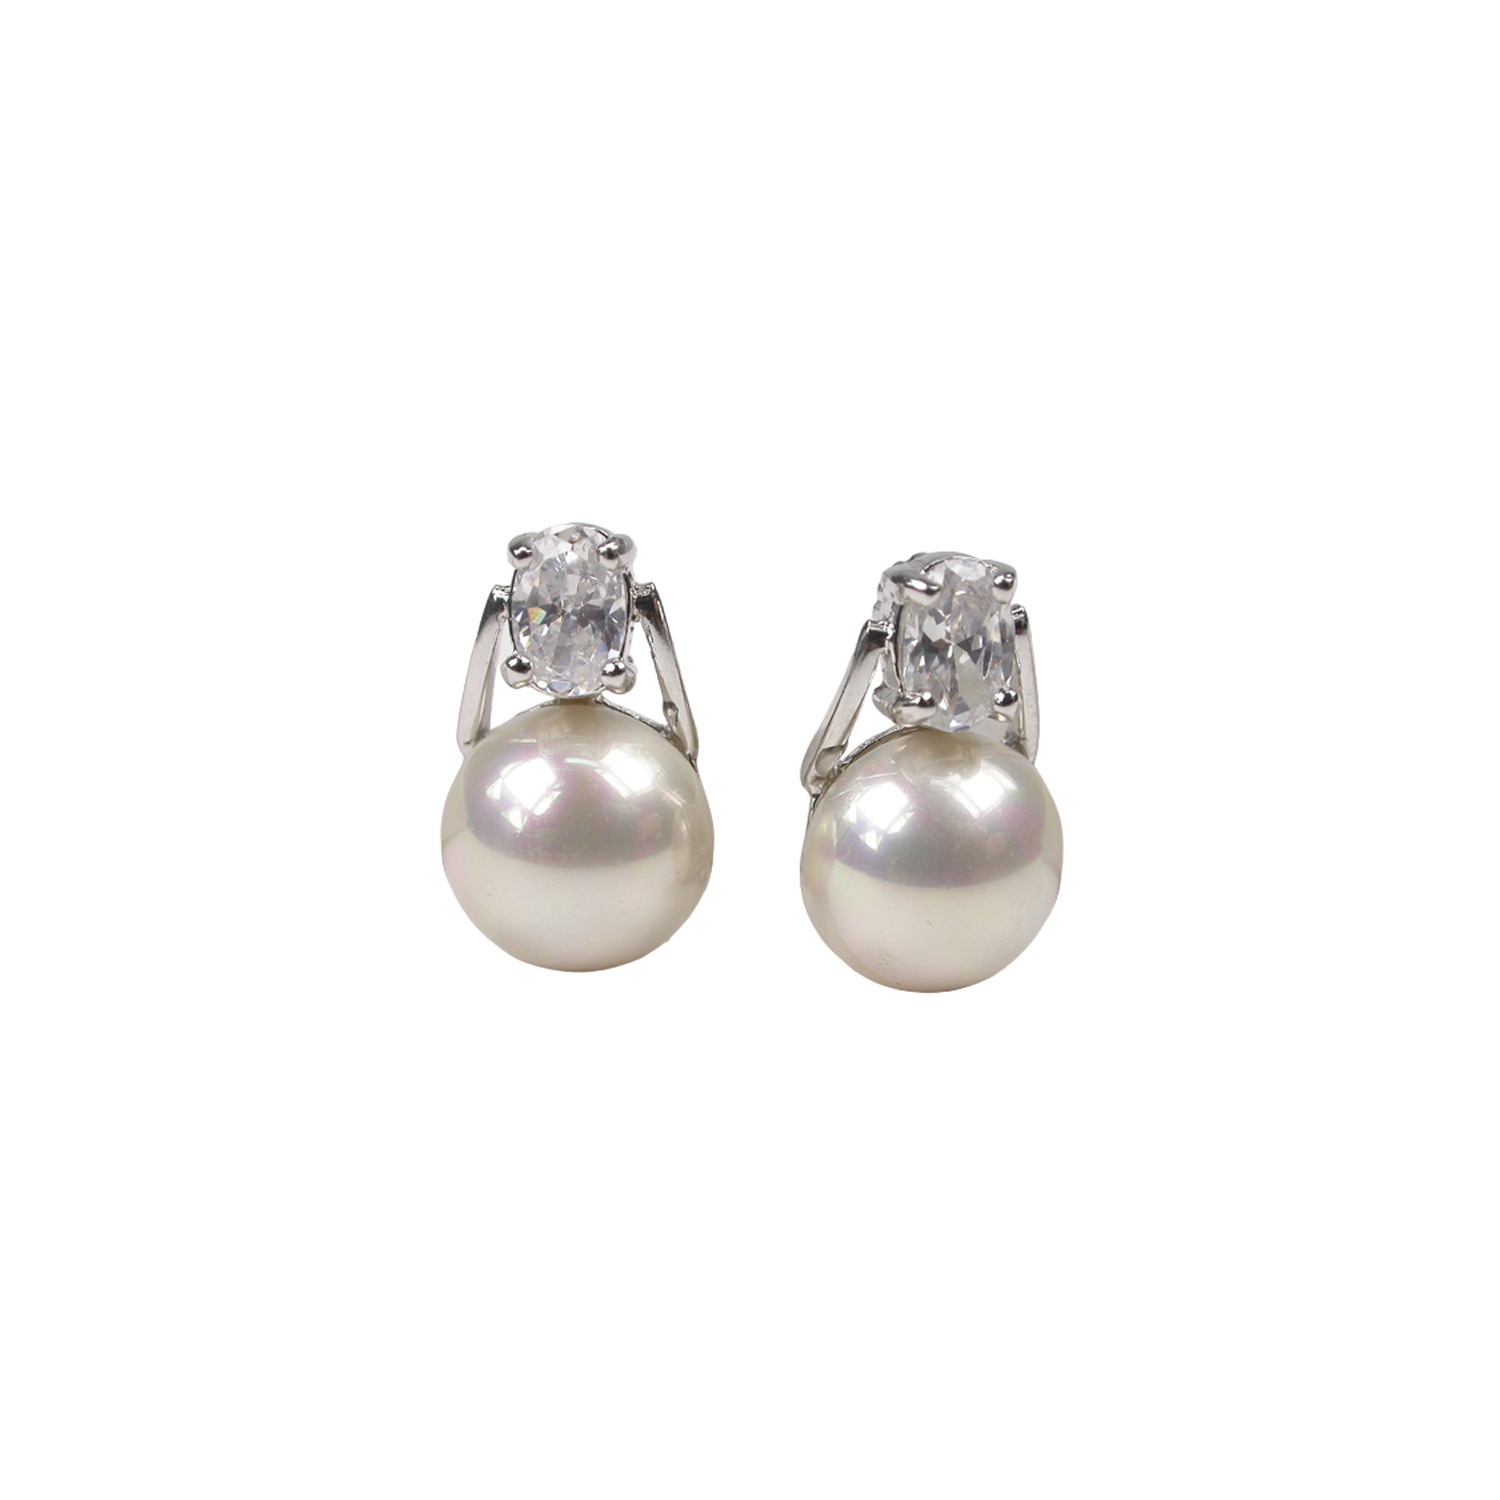 Earrings in Sterling Silver with cabouchon Pearls and zircons